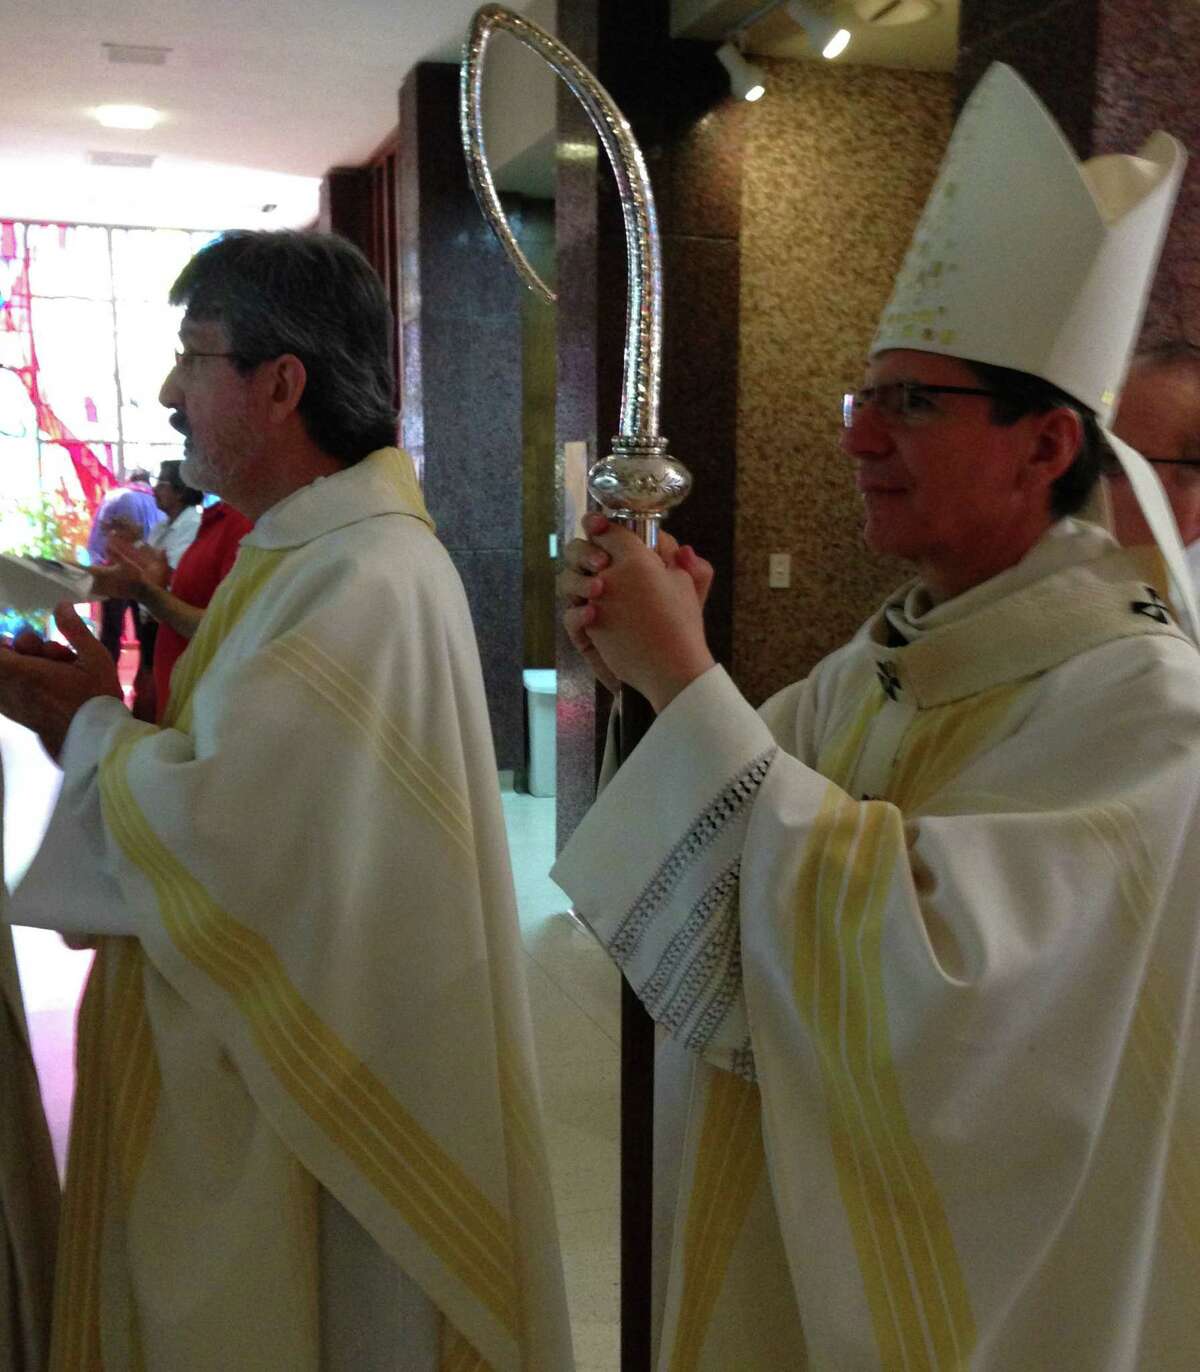 Rev. Norman Ermis, St. Margaret Mary's pastor, left, and Archbishop Gustavo Garcia-Siller lead the procession at the Mass celebrating the rededication of St. Margaret Mary Catholic Church.